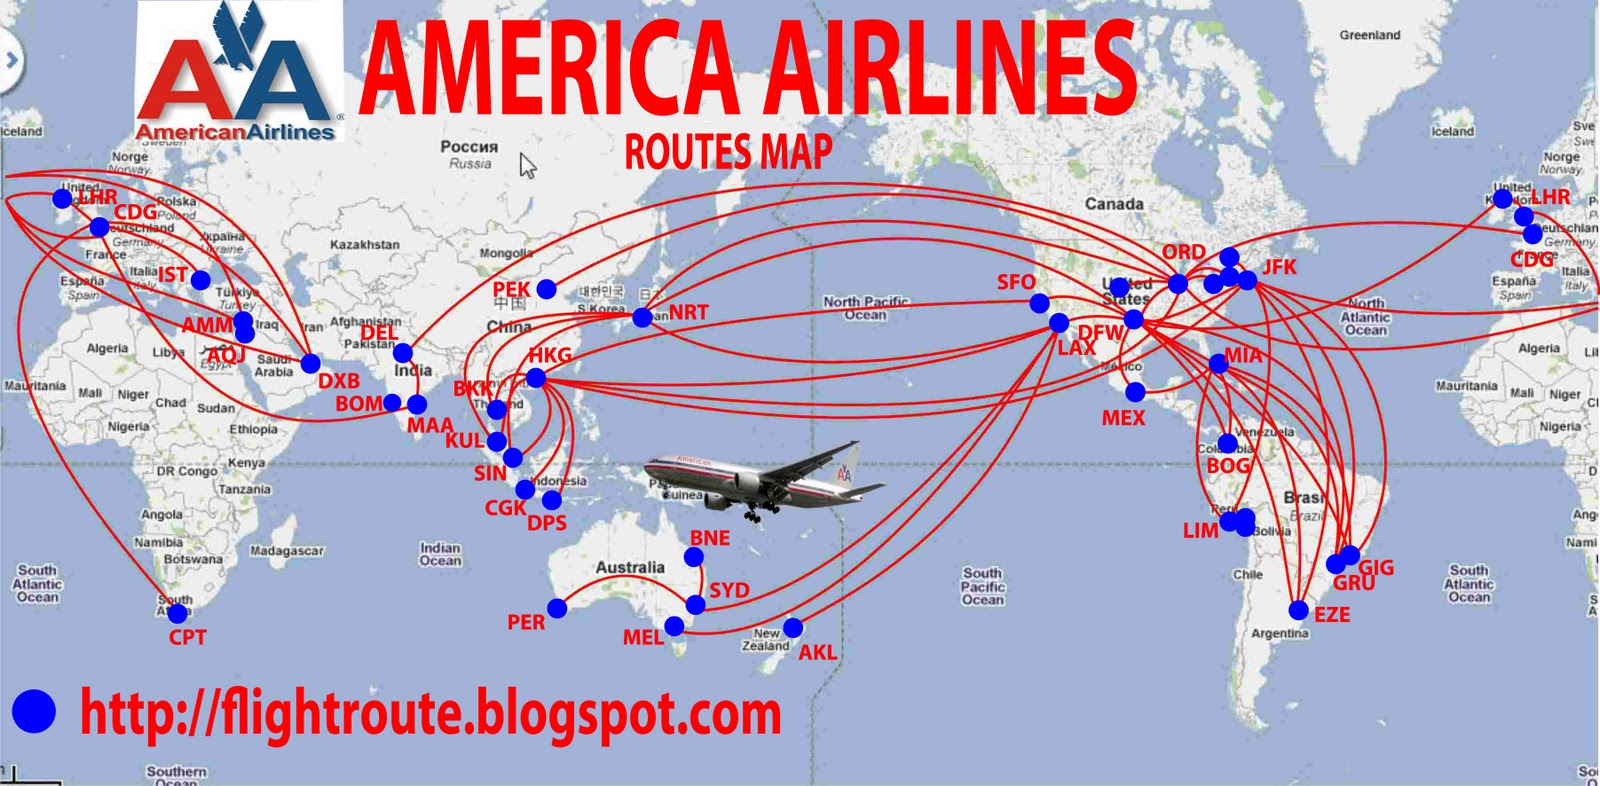 Airlines: American Airlines Routes Map